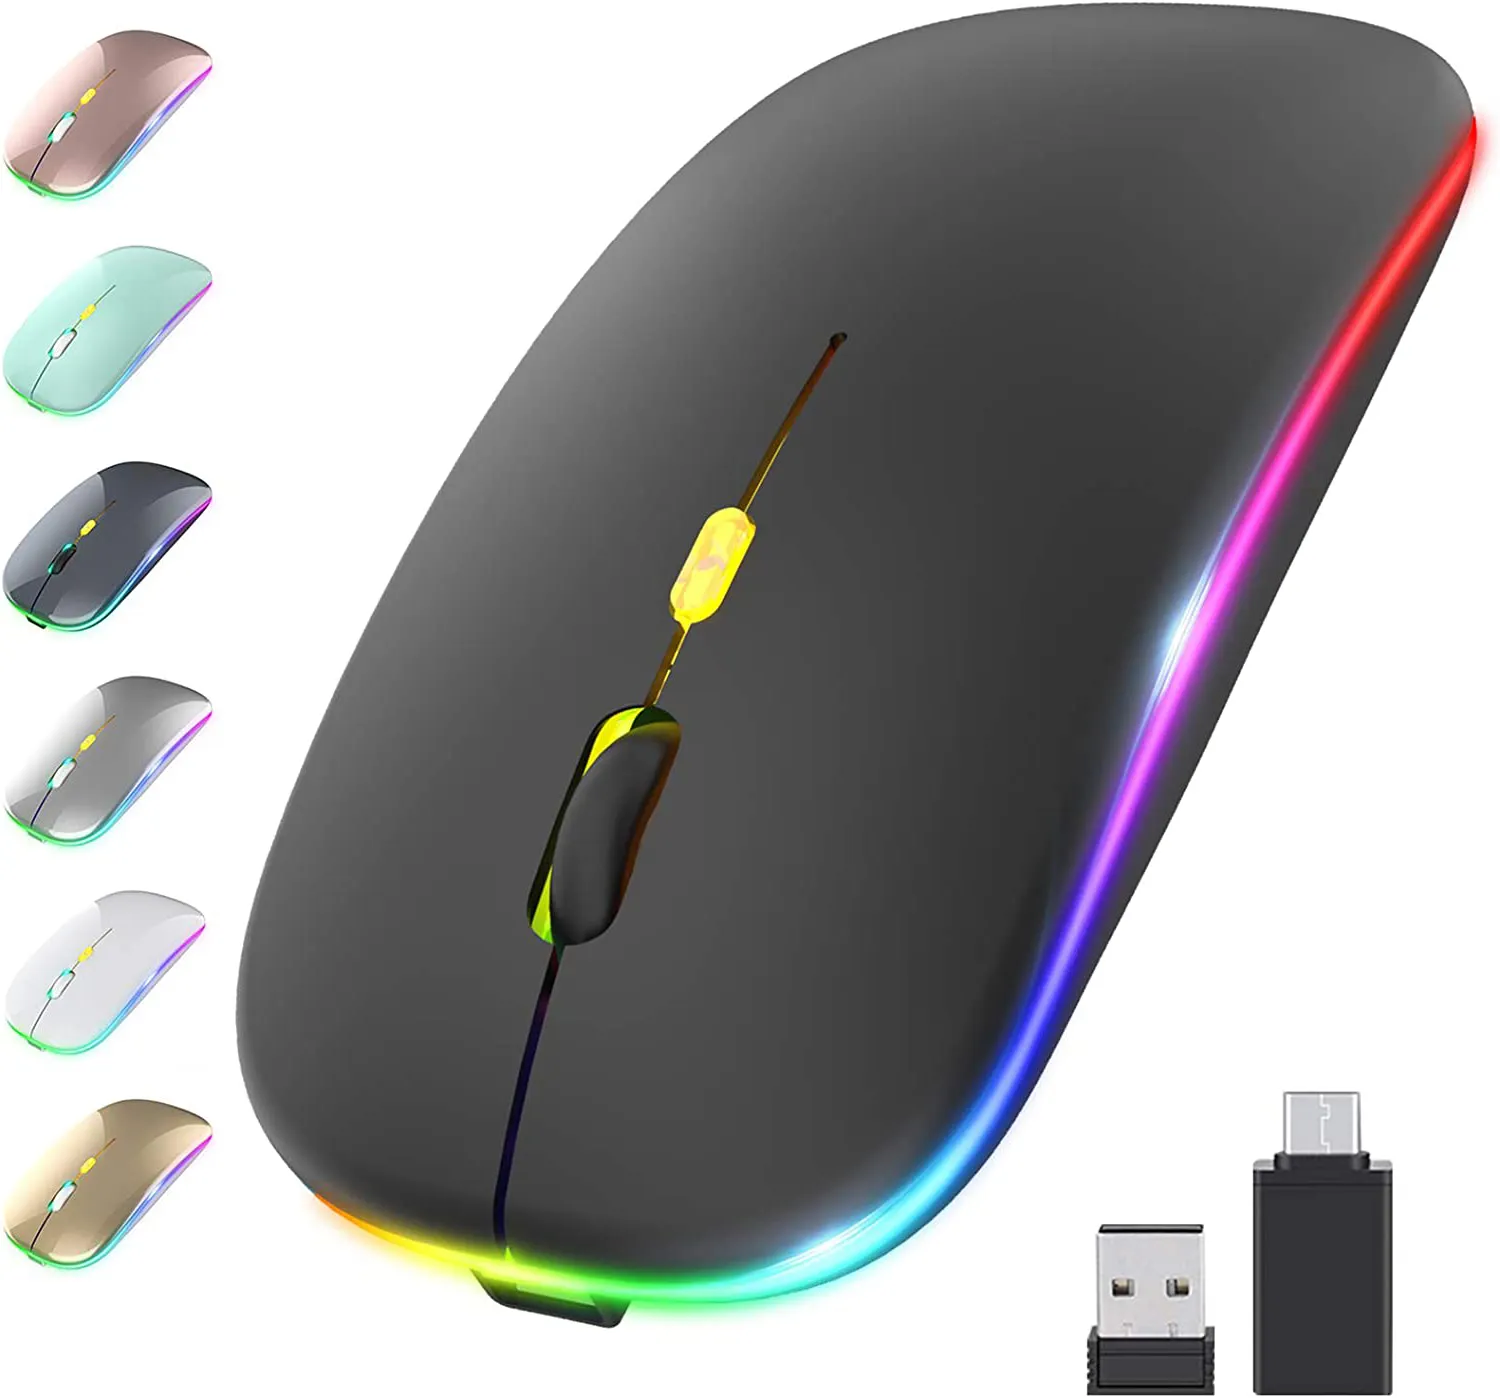 Cheap 2.4G LED Slim Portable Mobile Optical Office Silent RGB Rechargeable Ergonomic Computer Wireless Mouse With USB